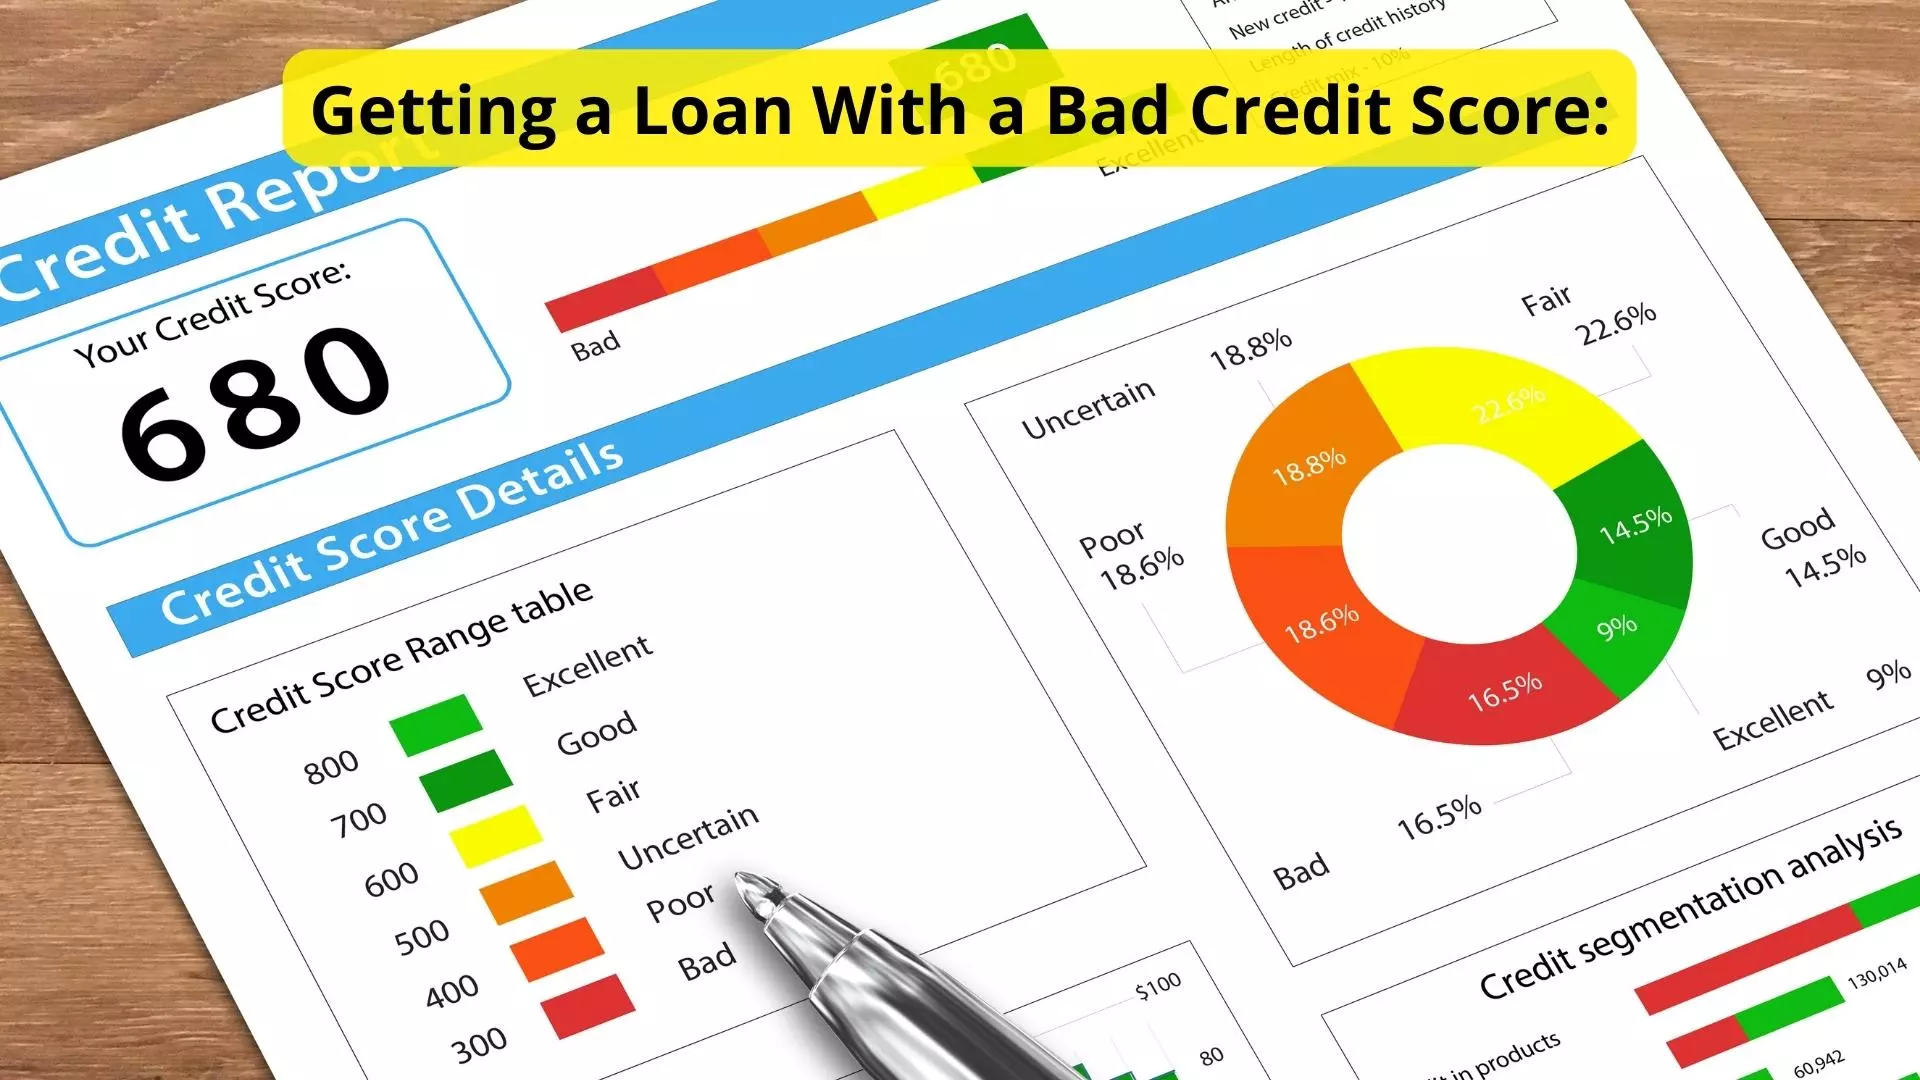 Getting a Loan With a Bad Credit Score